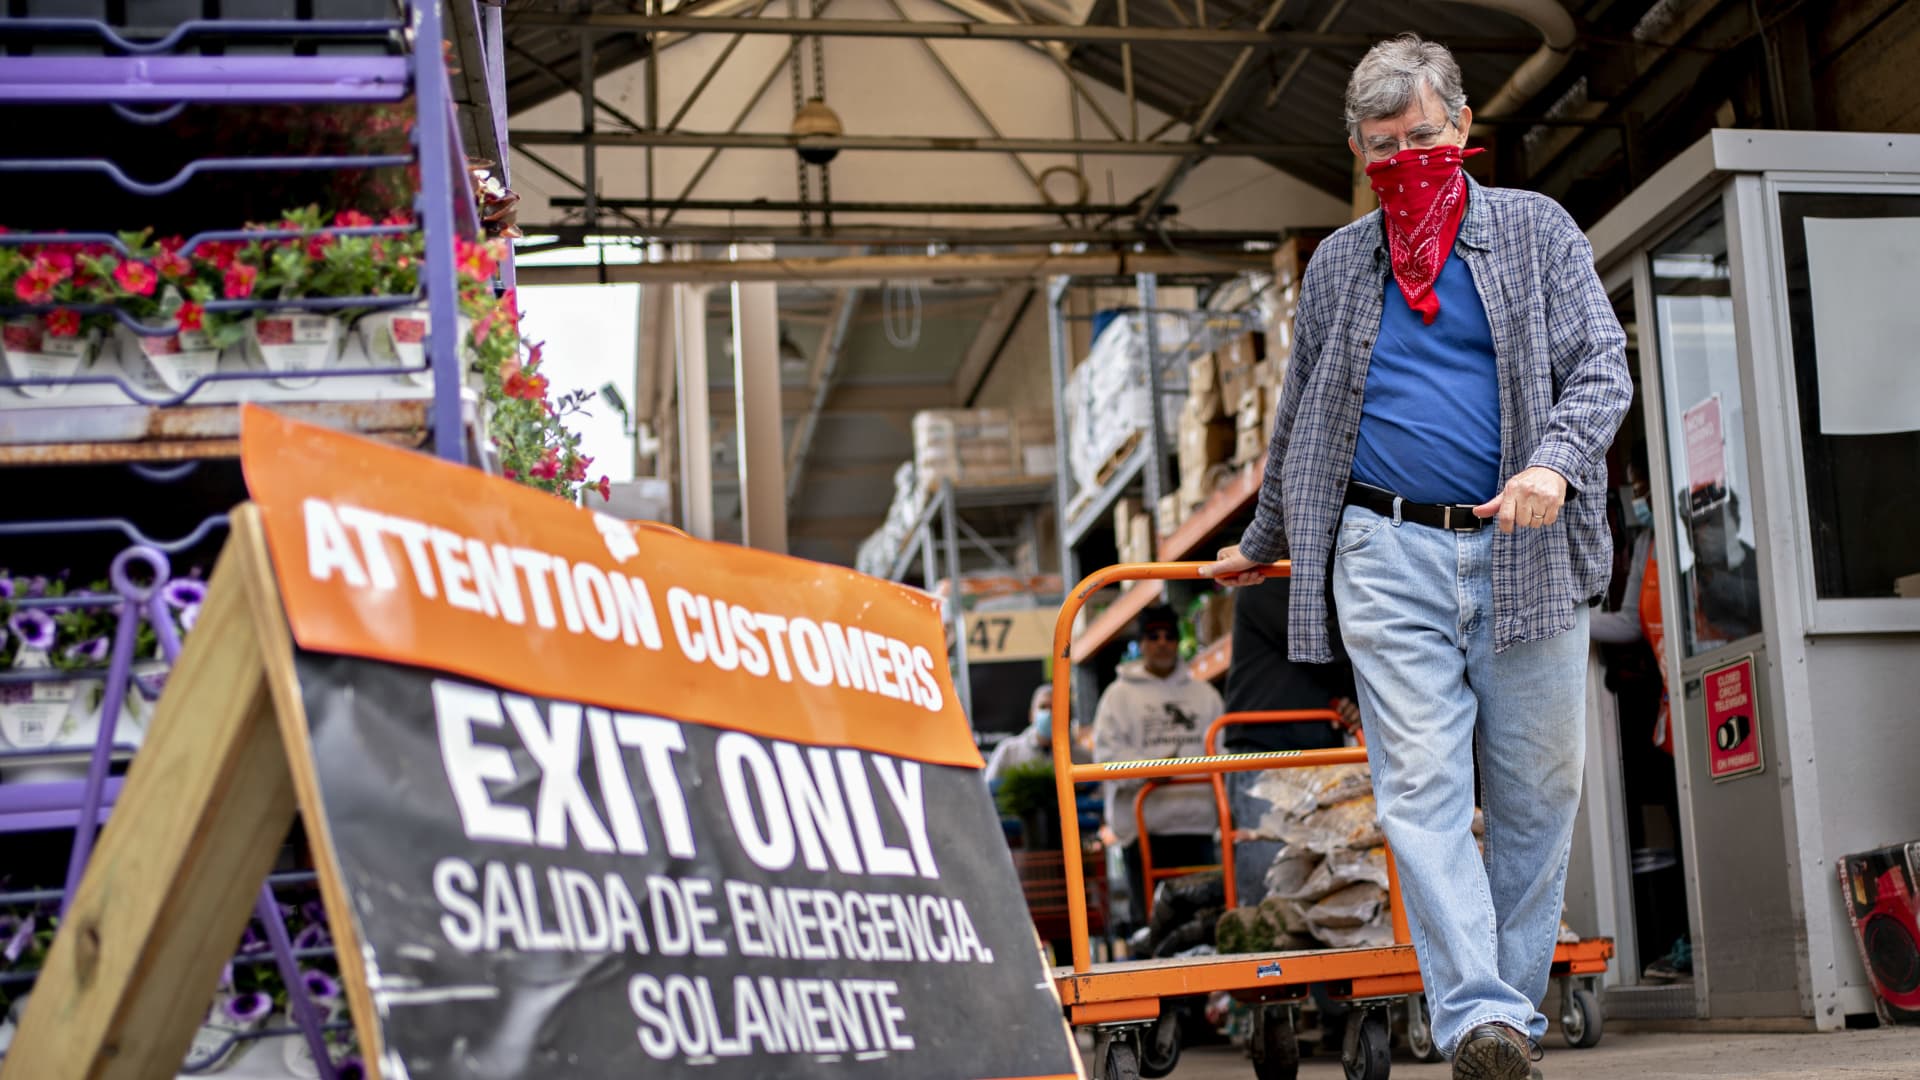 A customer wears a protective mask while pulling a cart outside a Home Depot Inc. store in Reston, Virginia, U.S., on Thursday, May 21, 2020.